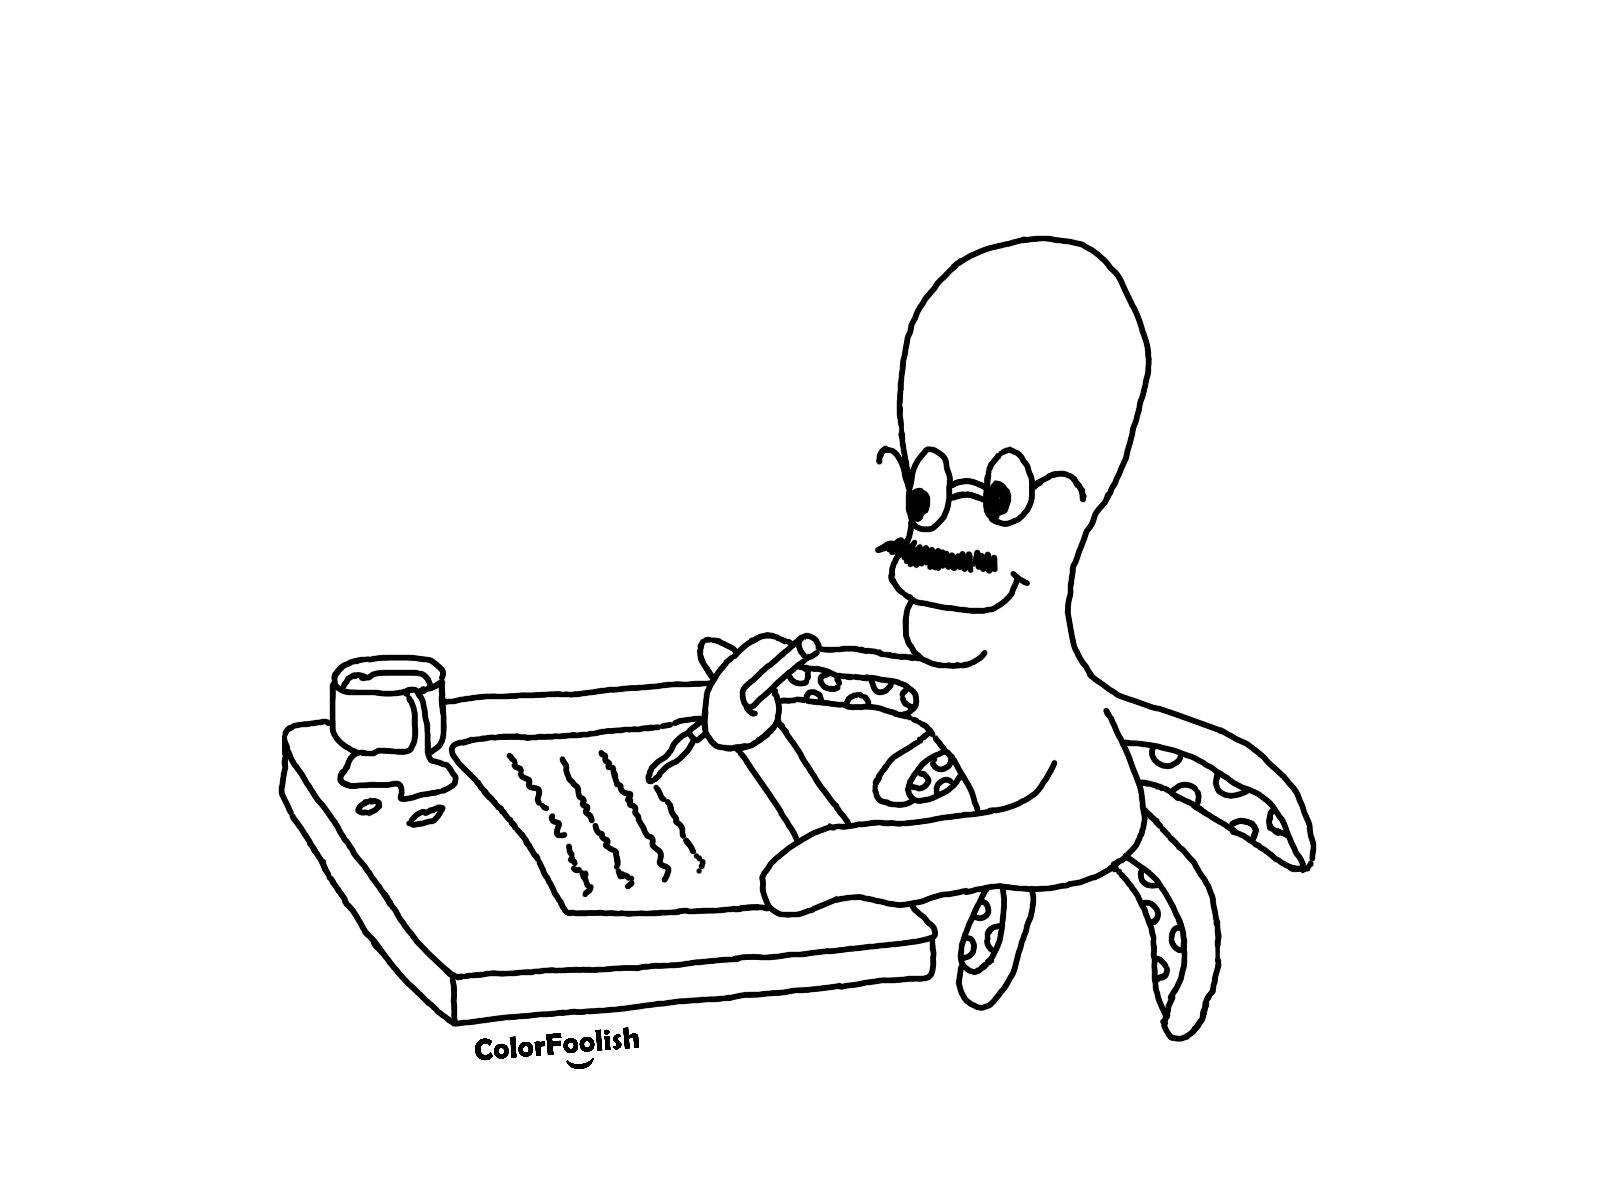 Coloring page of a squid writing a letter